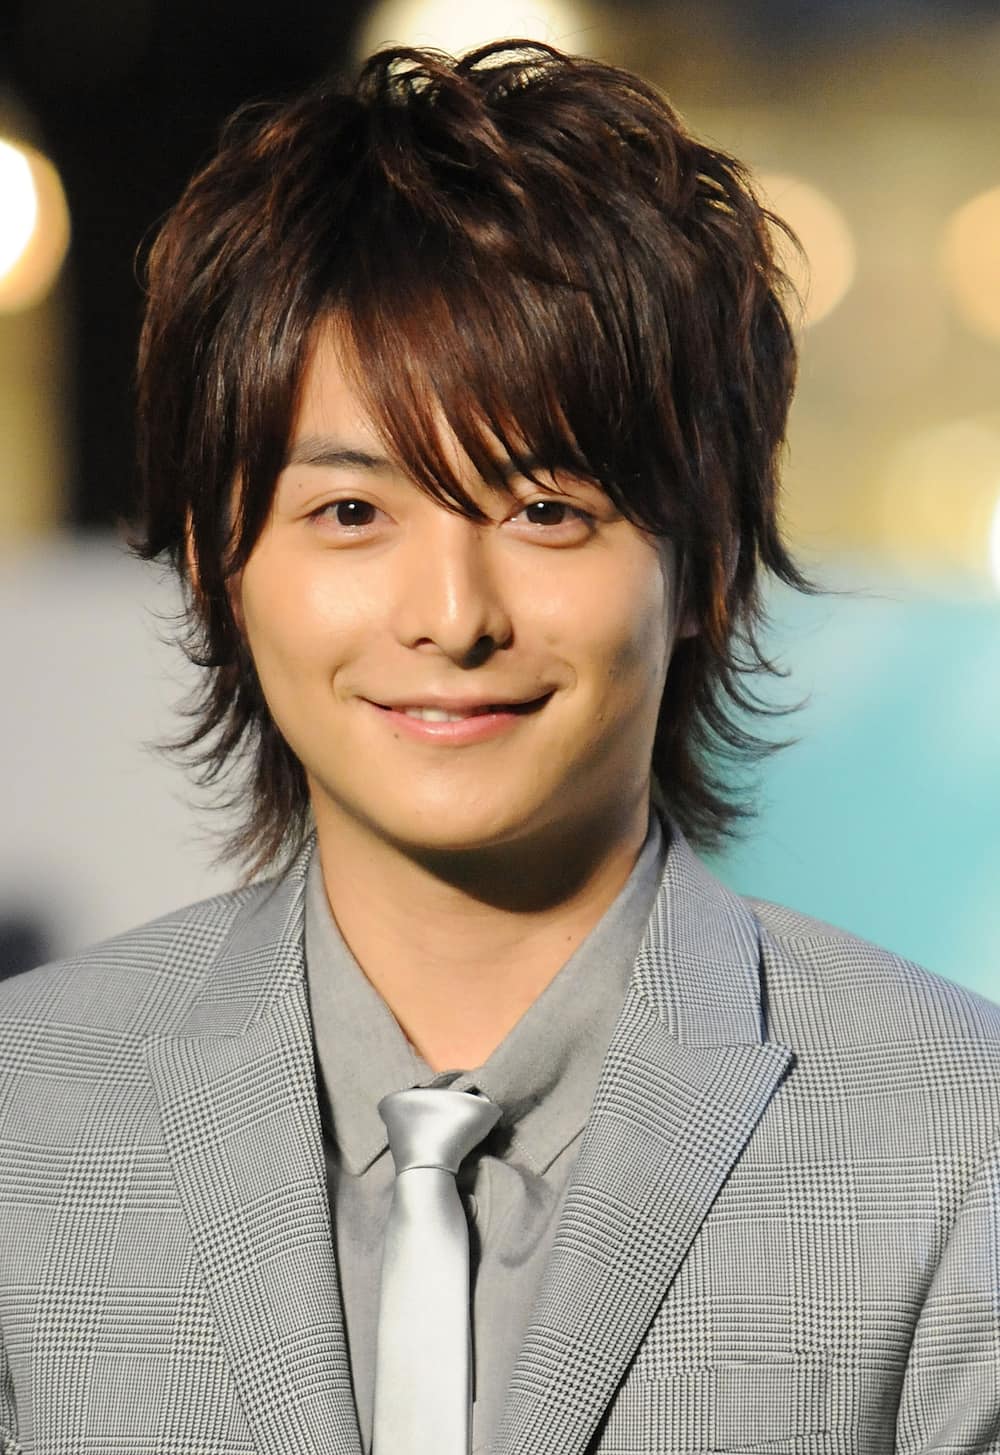 Who are the most handsome Japanese actors?